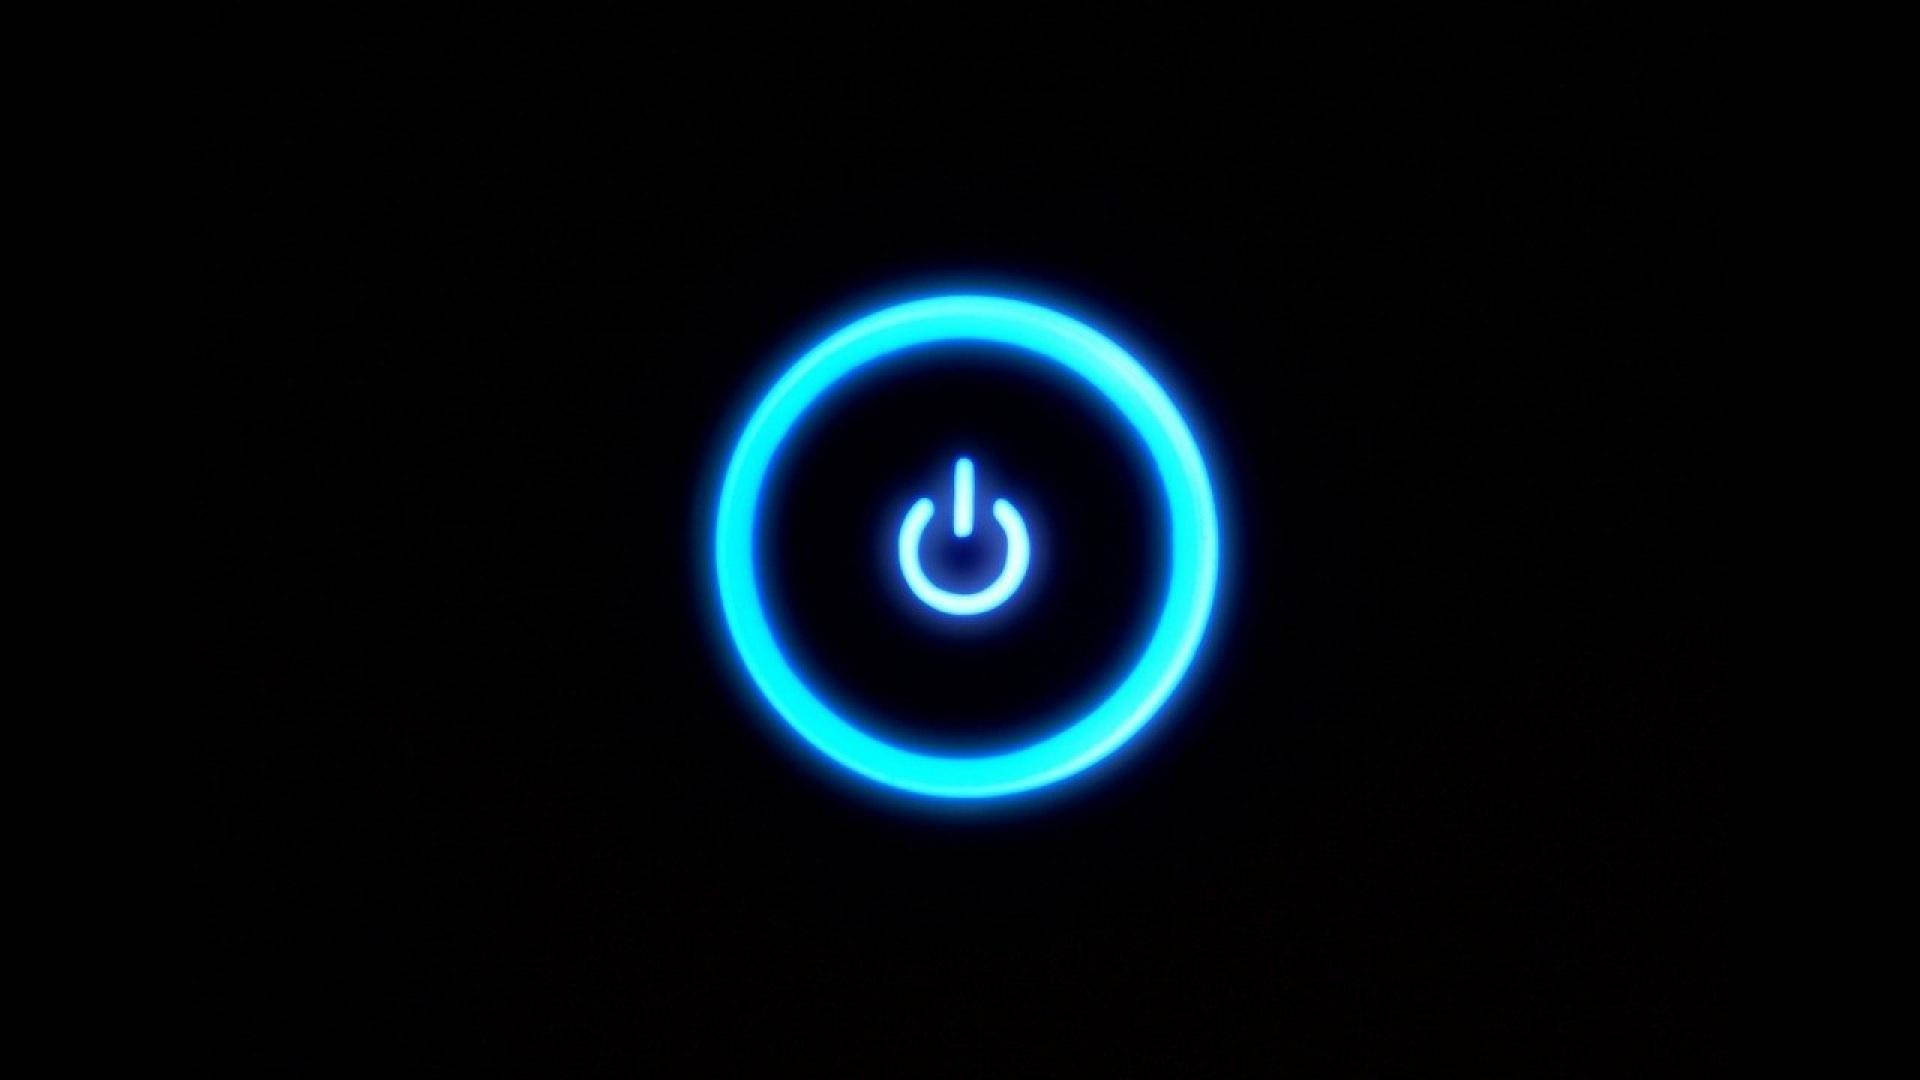 Black And Blue Power Button Background